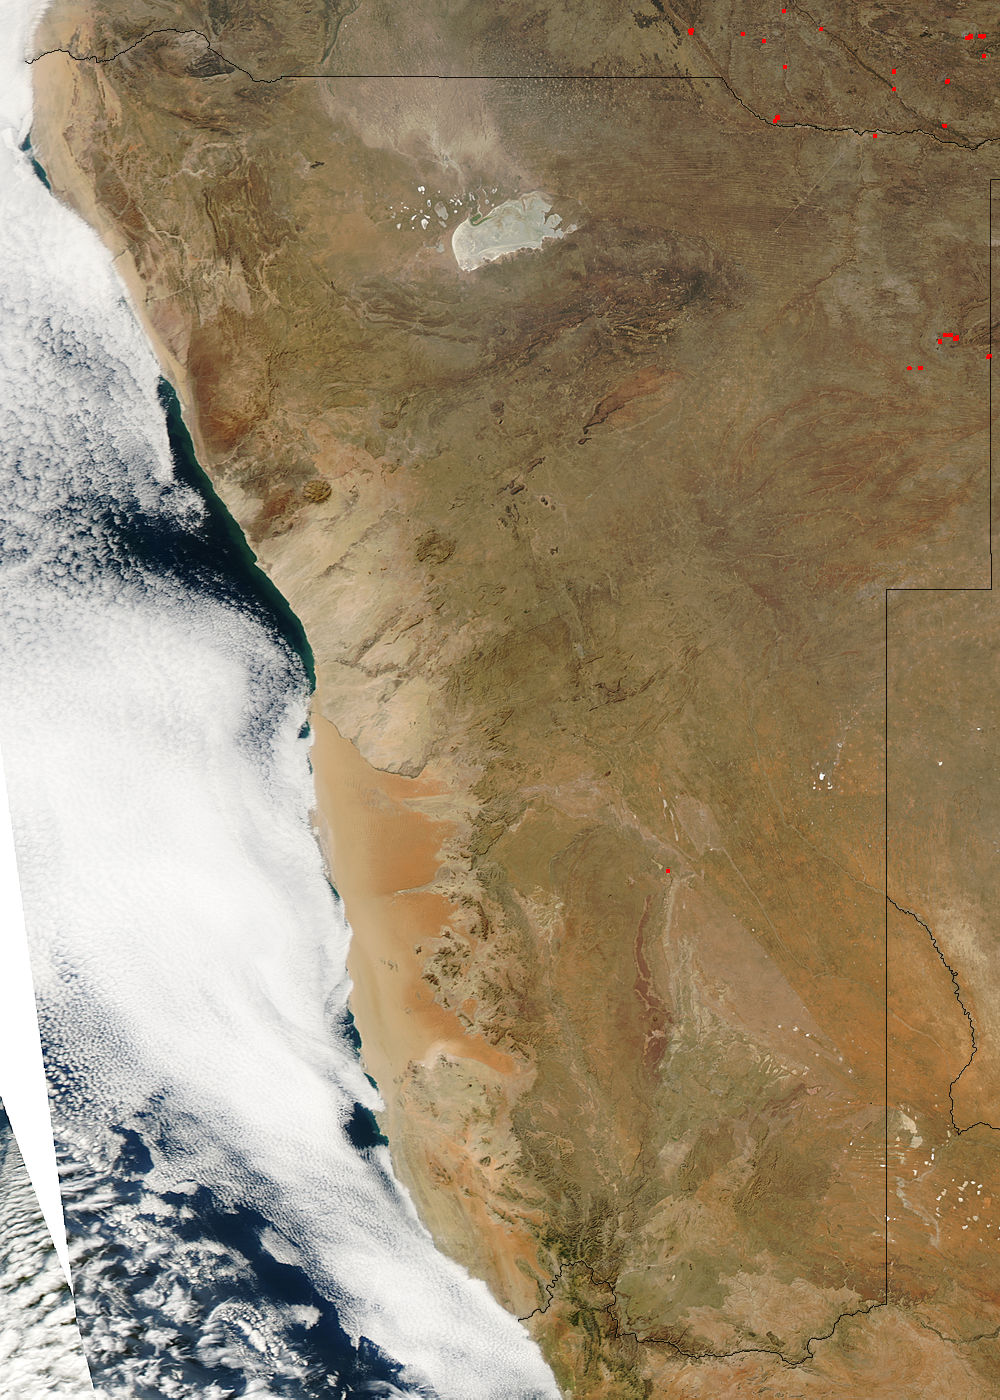 Namibia and the Namib Desert - related image preview